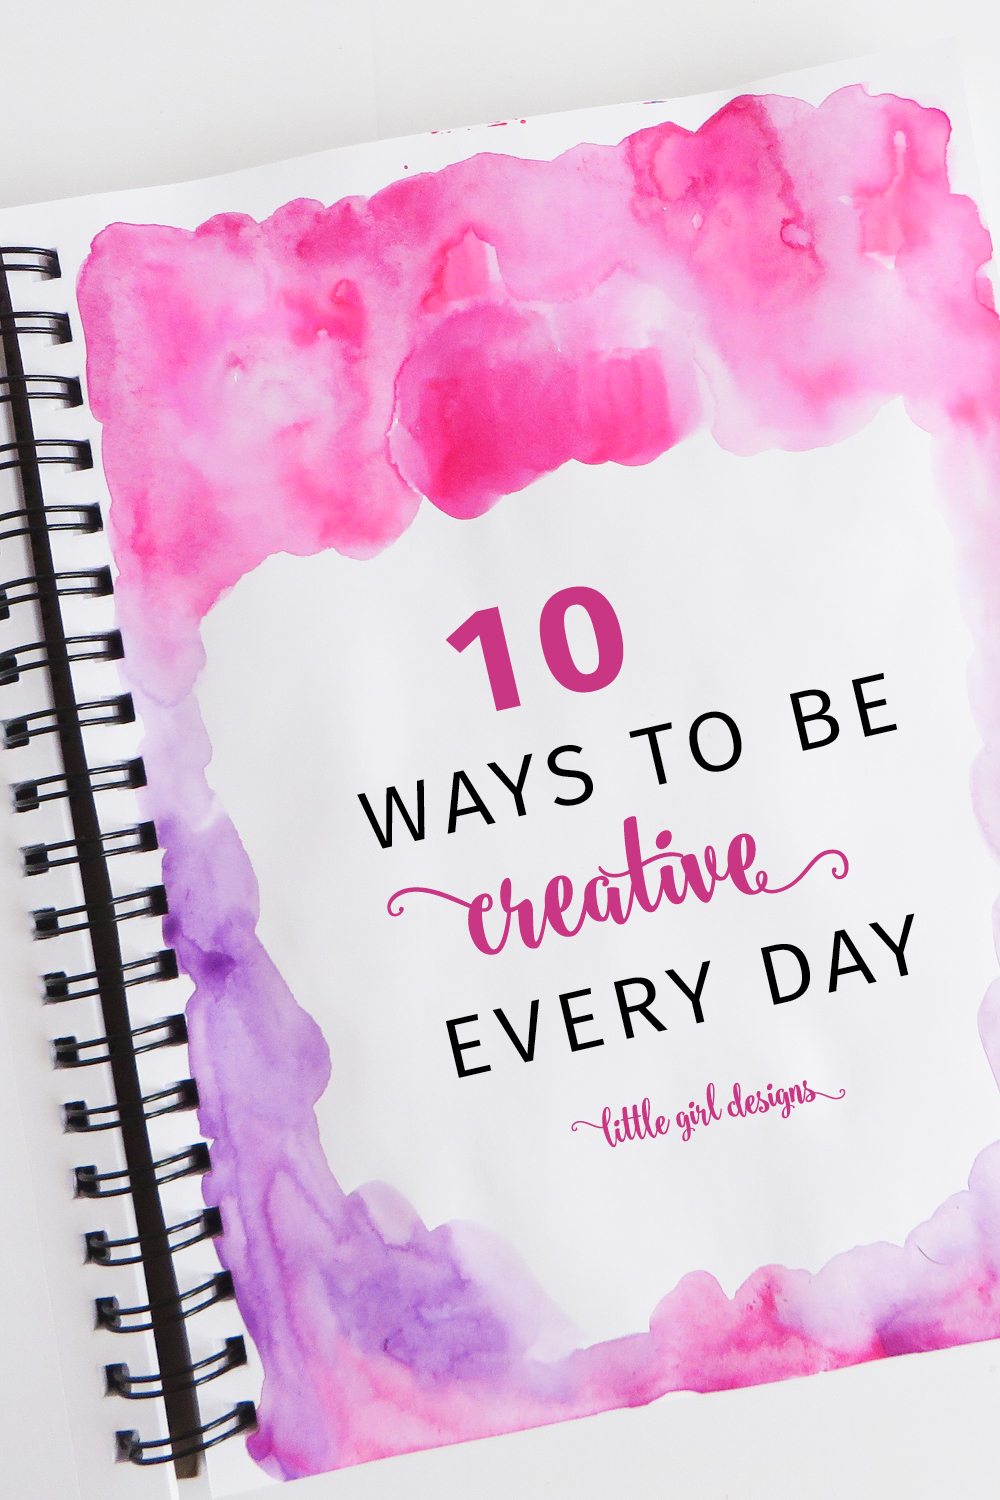 10 Easy Ways to Be Creative Every Day